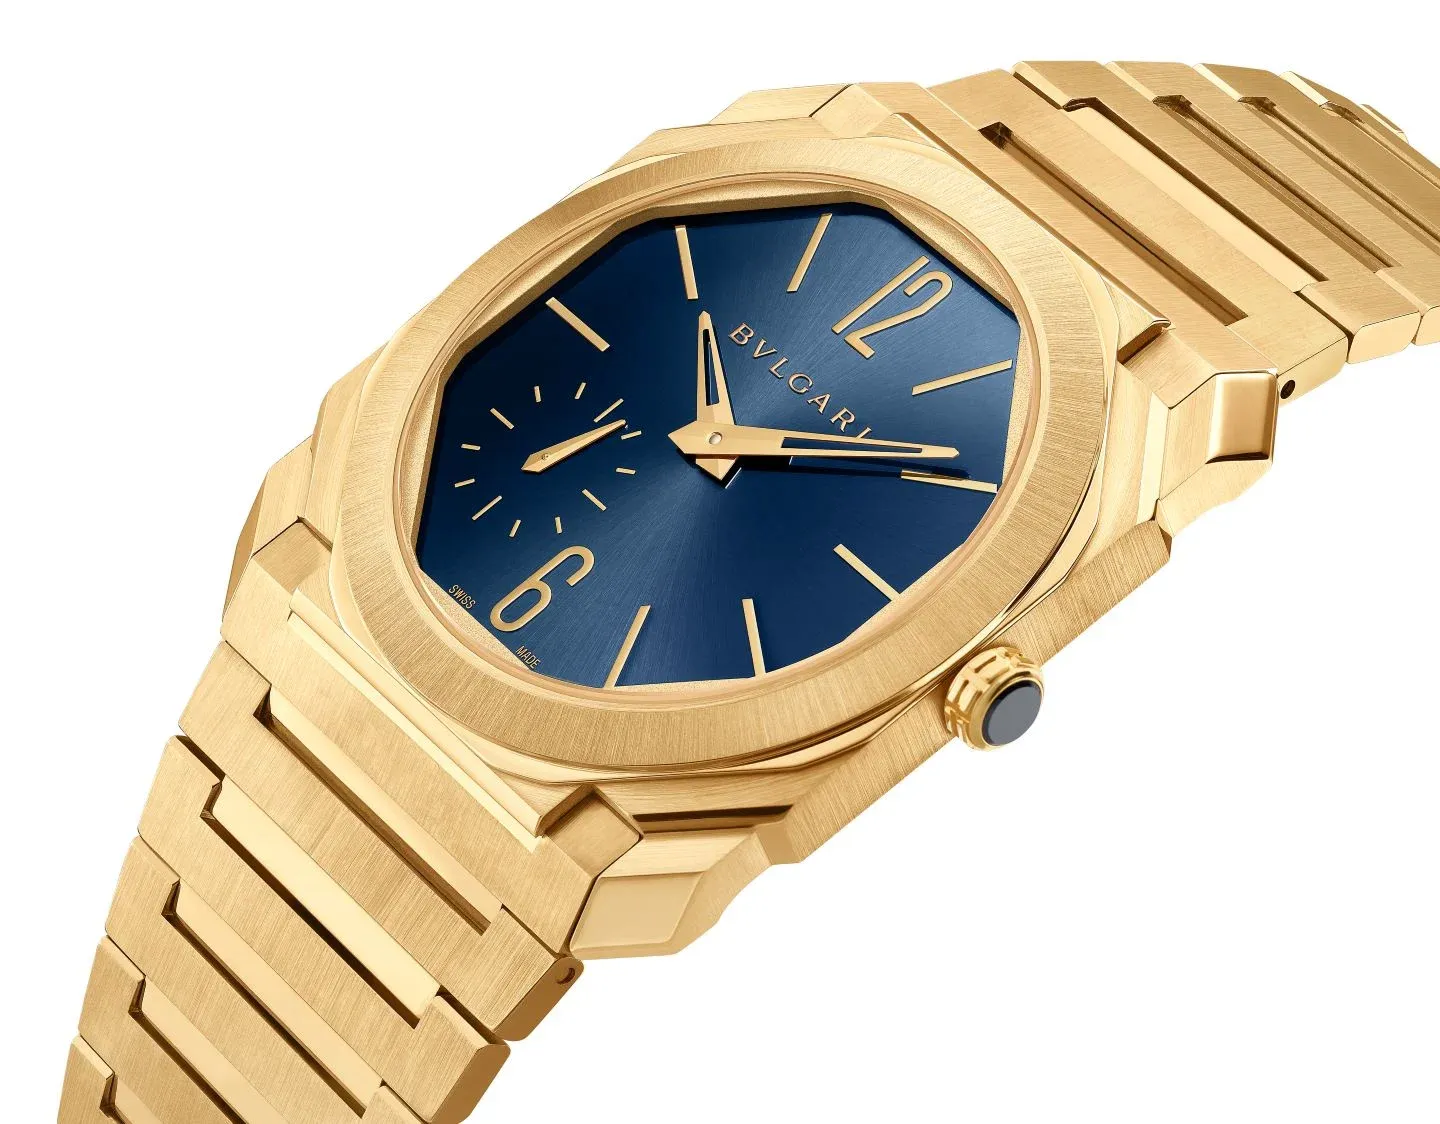 The Octo Finissimo Yellow Gold with sunray blue dial